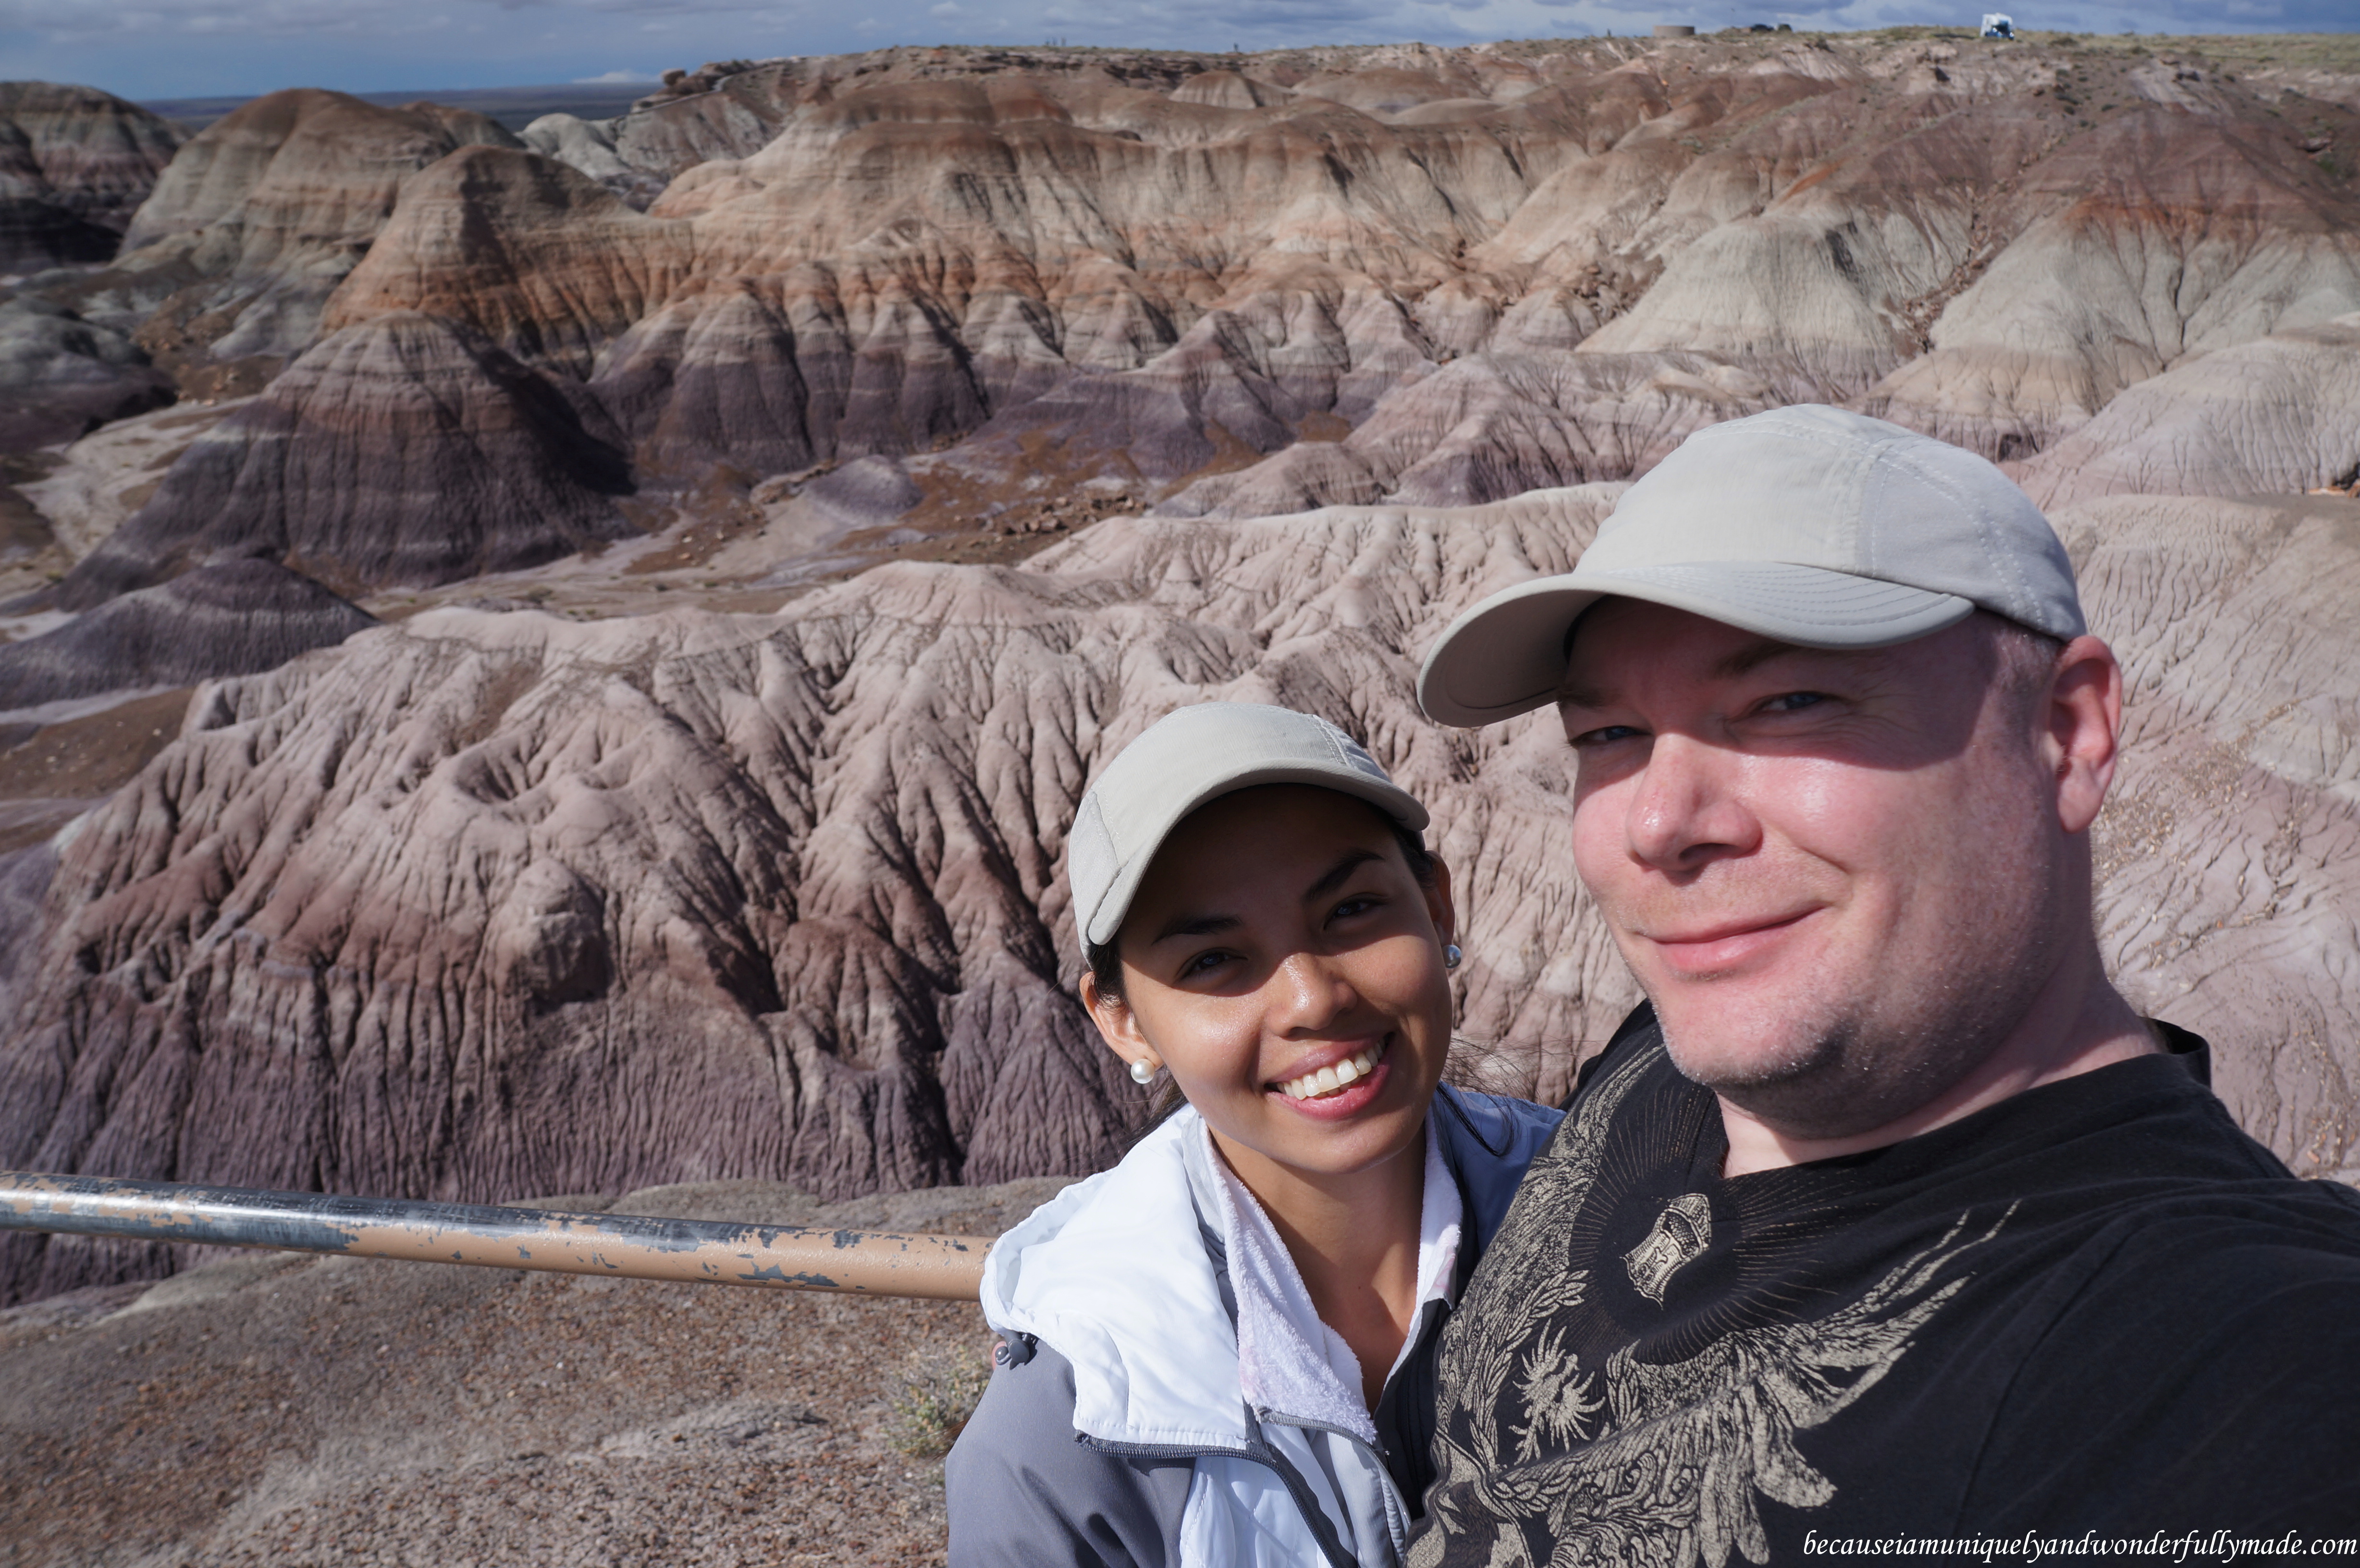 At Blue Mesa in Petrified Forest National Park in Arizona.